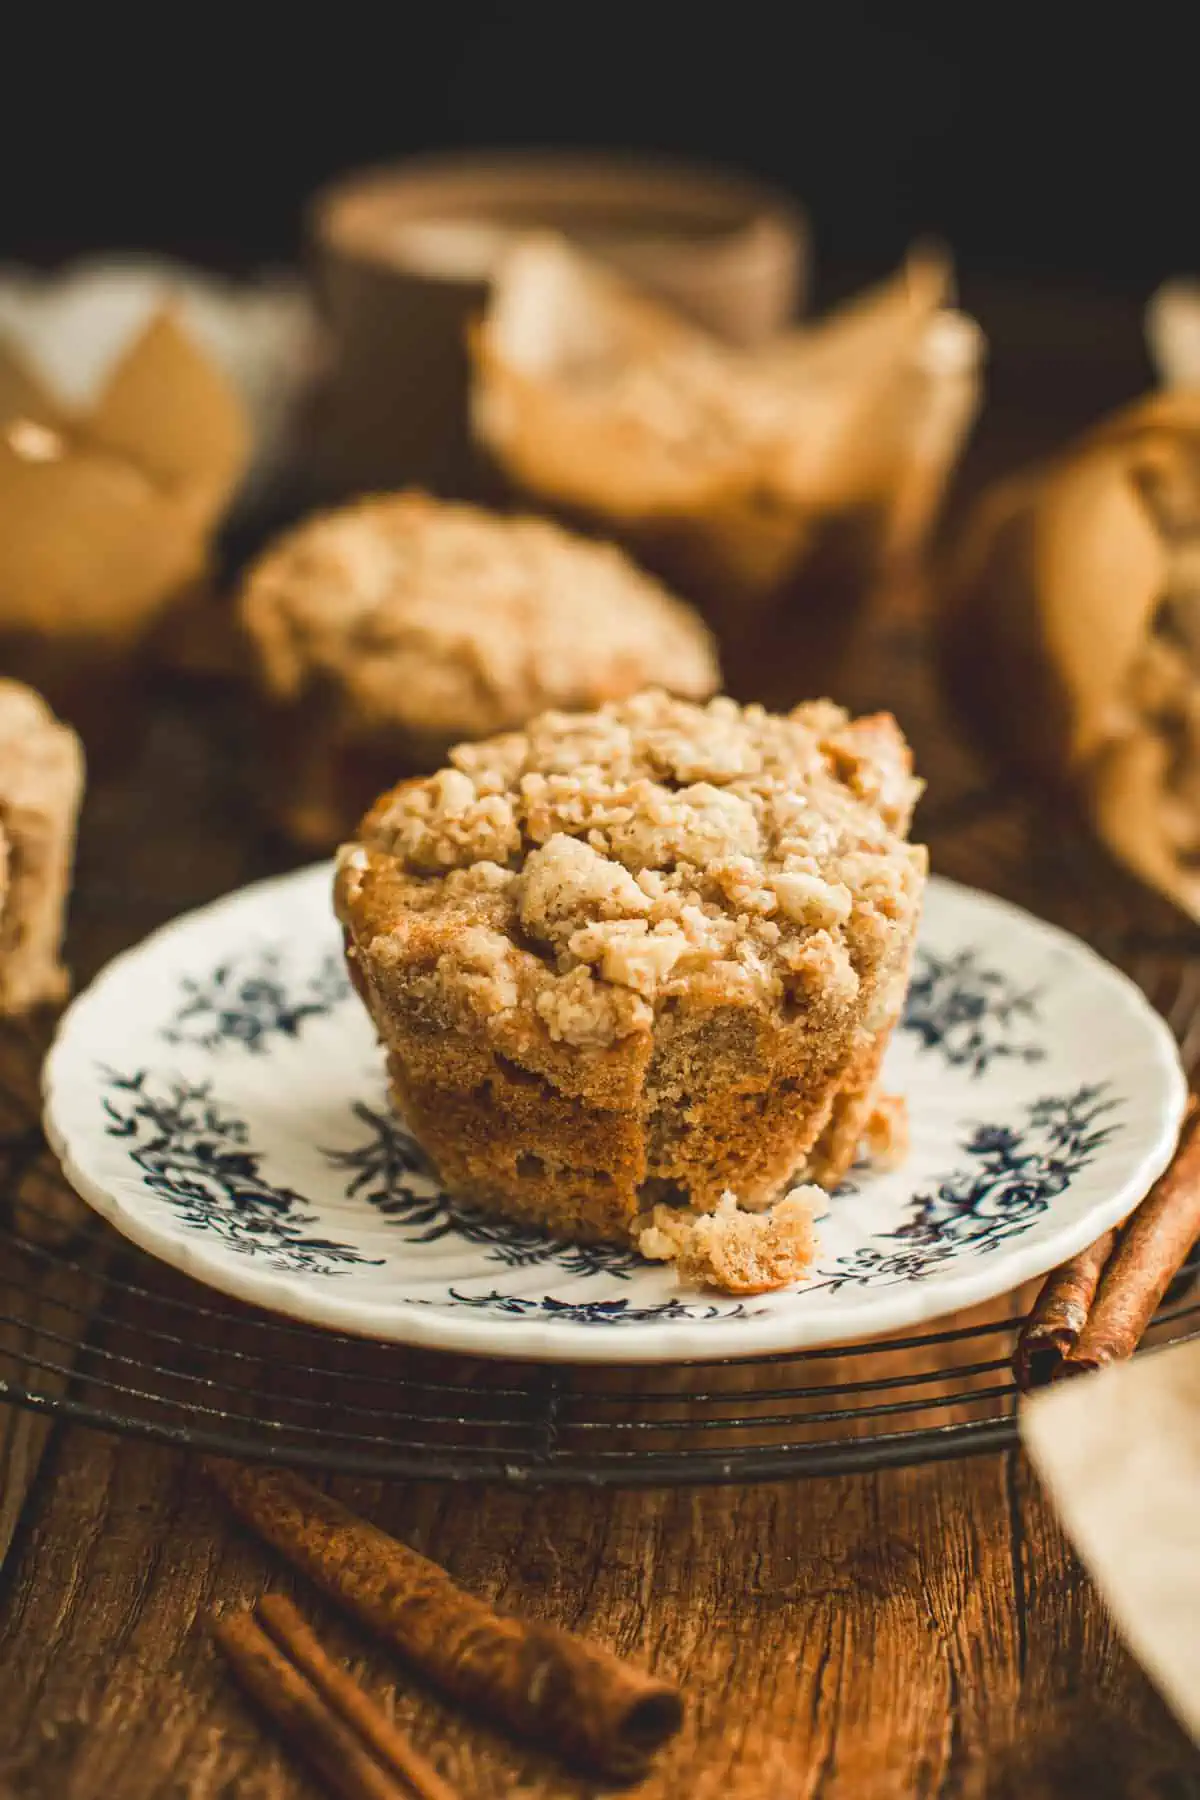 Apple cinnamon muffin on a blue and white plate.